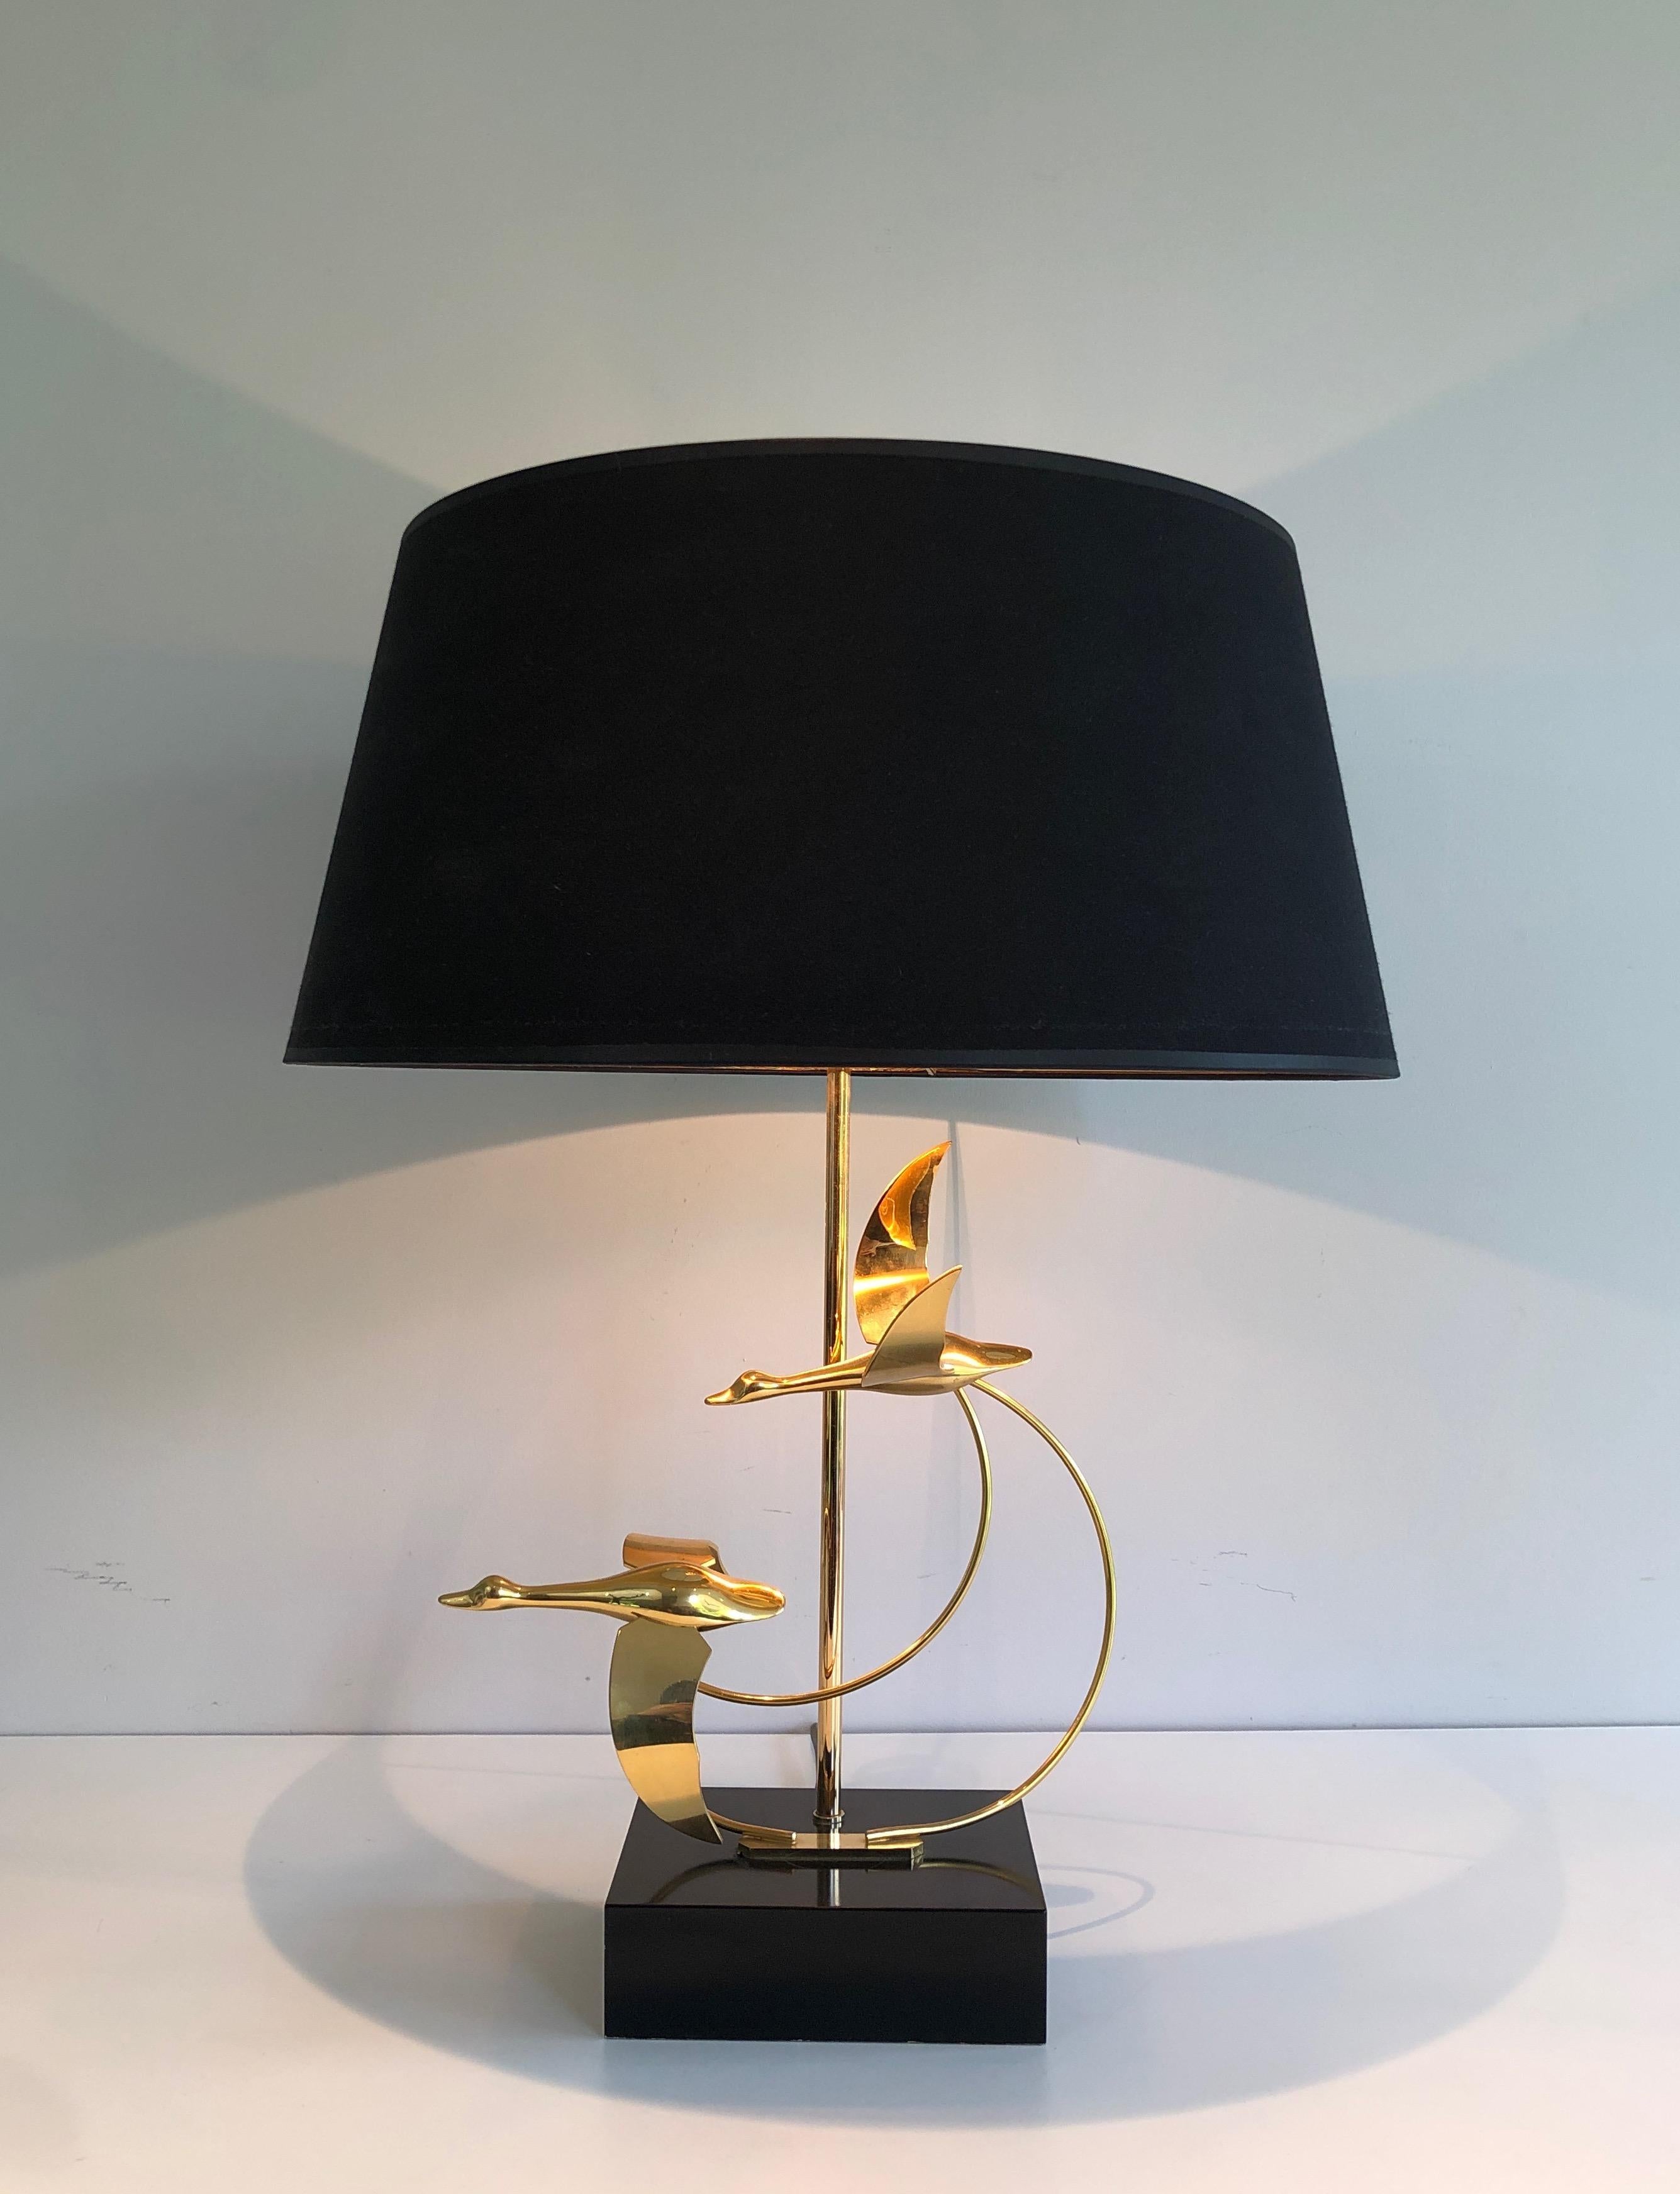 Flock of Wild Geese Brass Table Lamp, French, circa 1970 For Sale 12